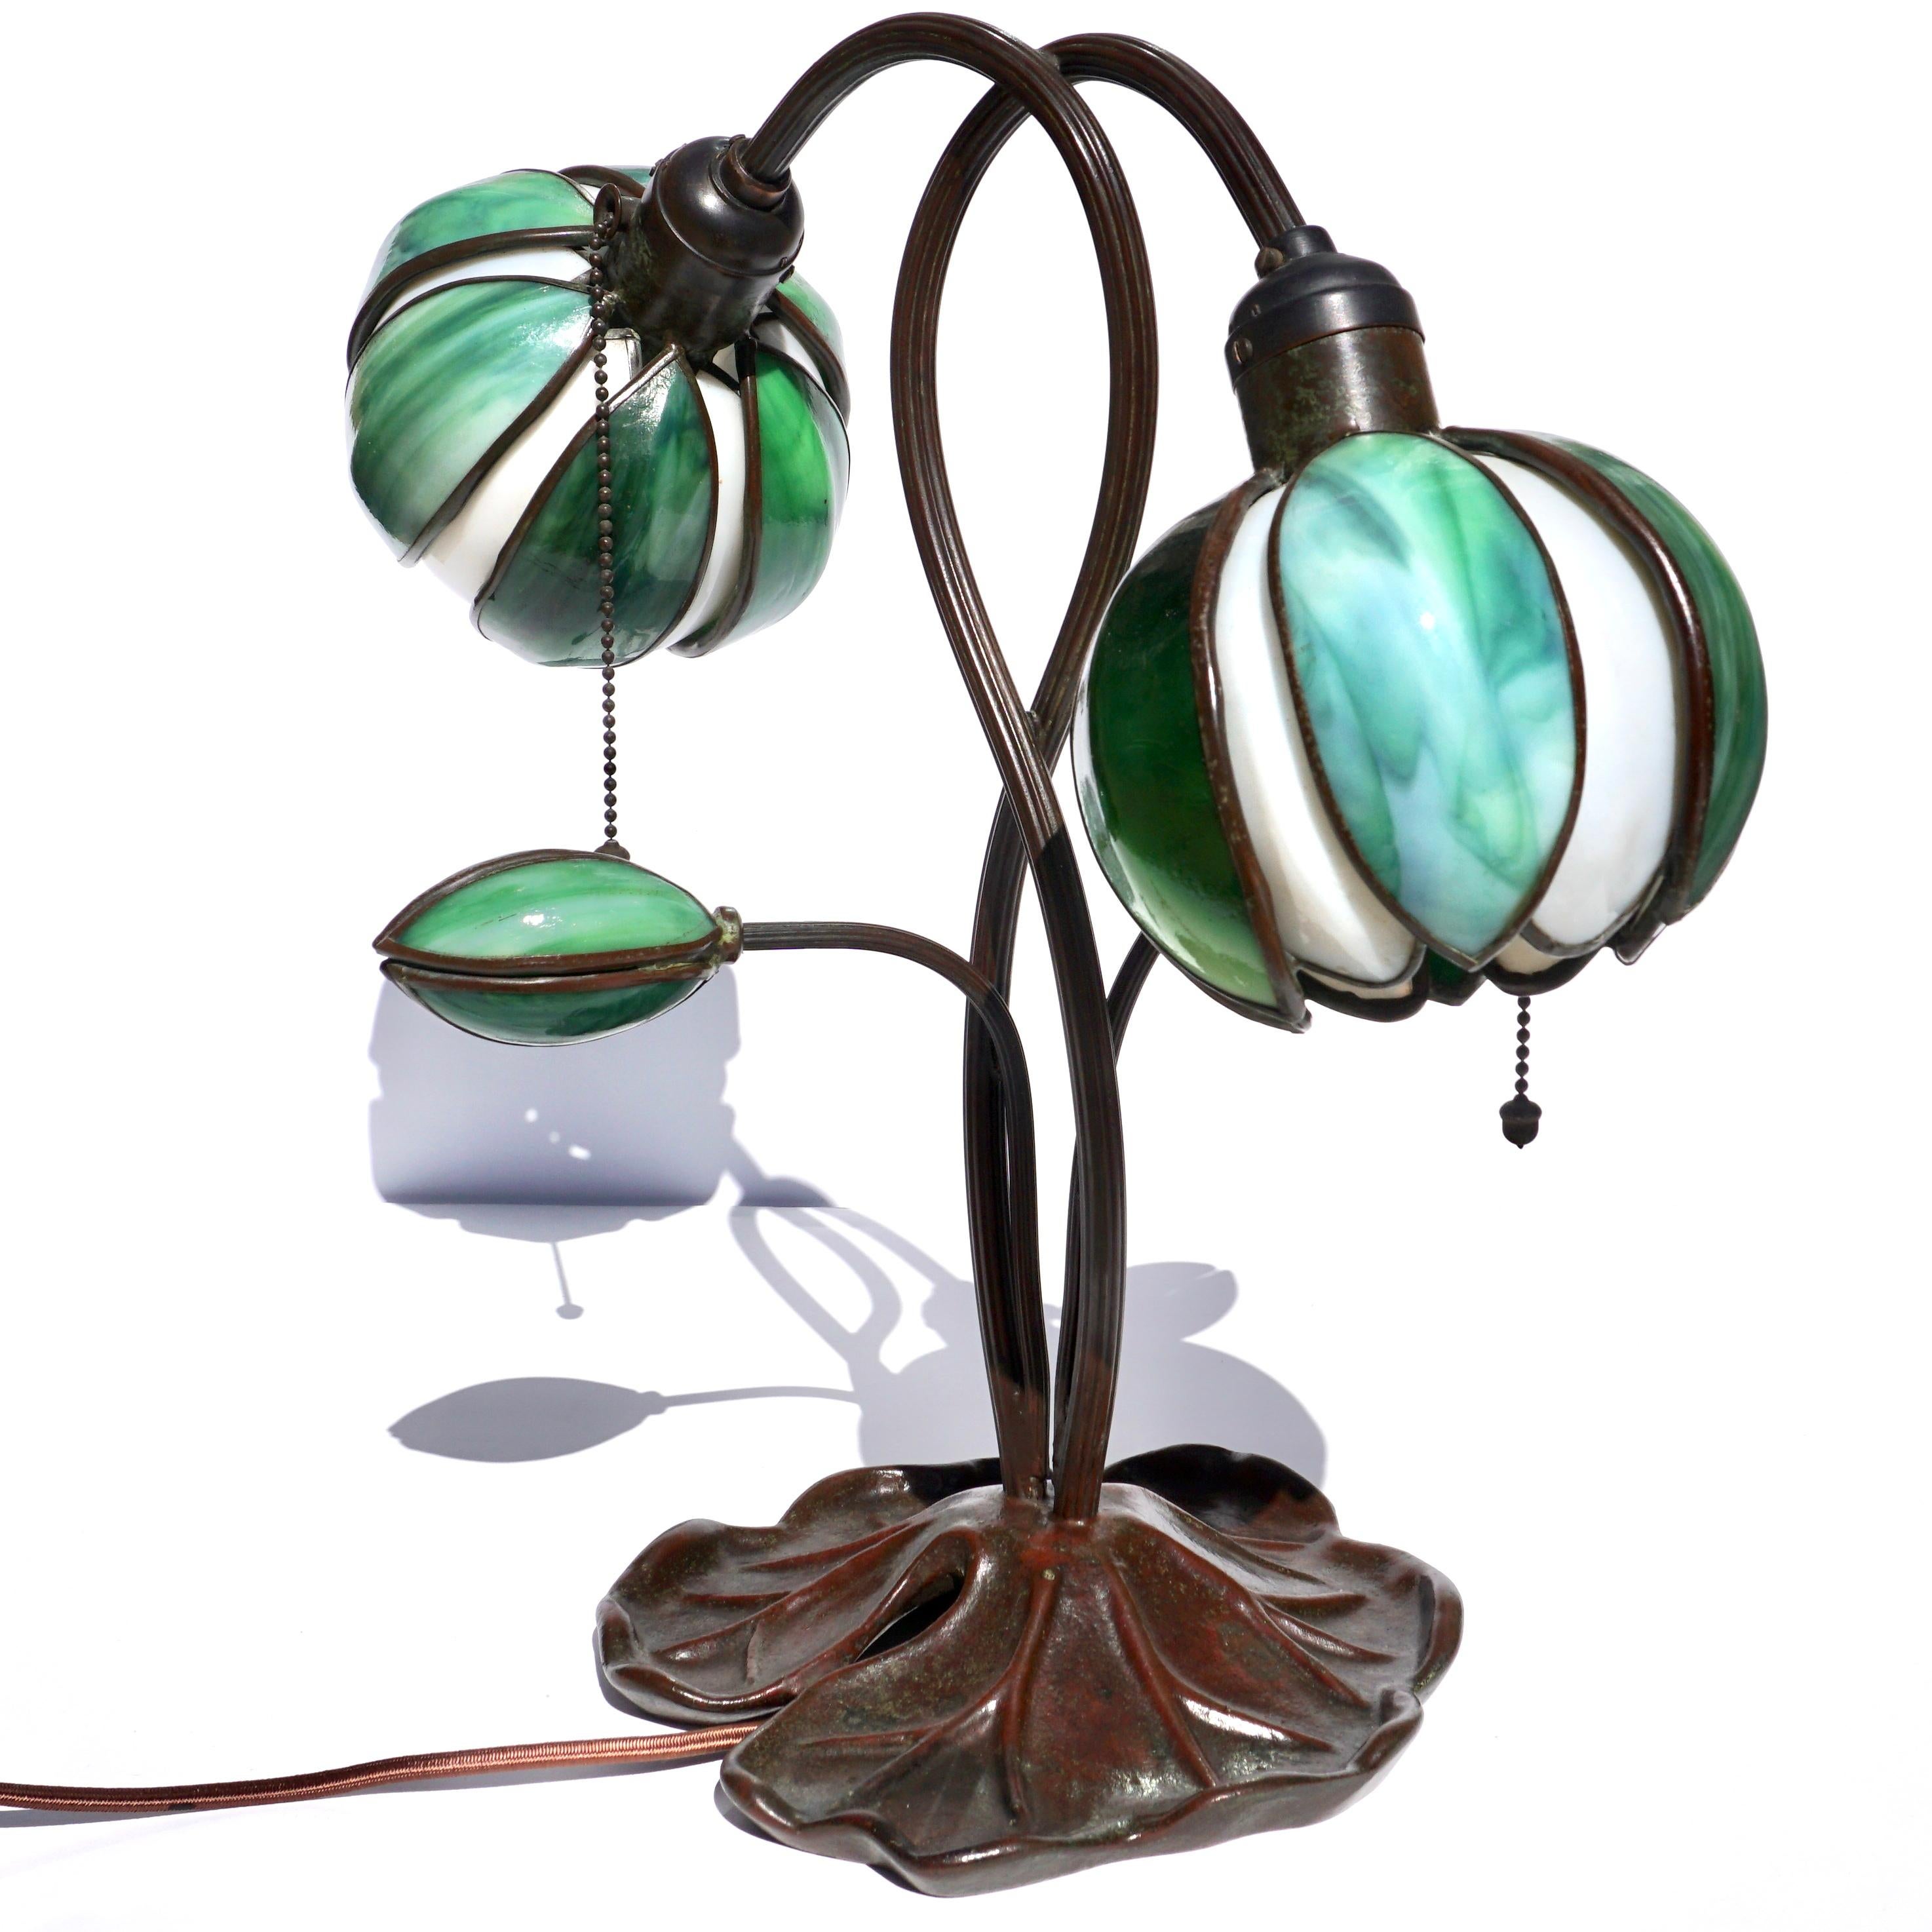 Hand-Crafted Art nouveau Handel Two Light Lily Desk Lamp